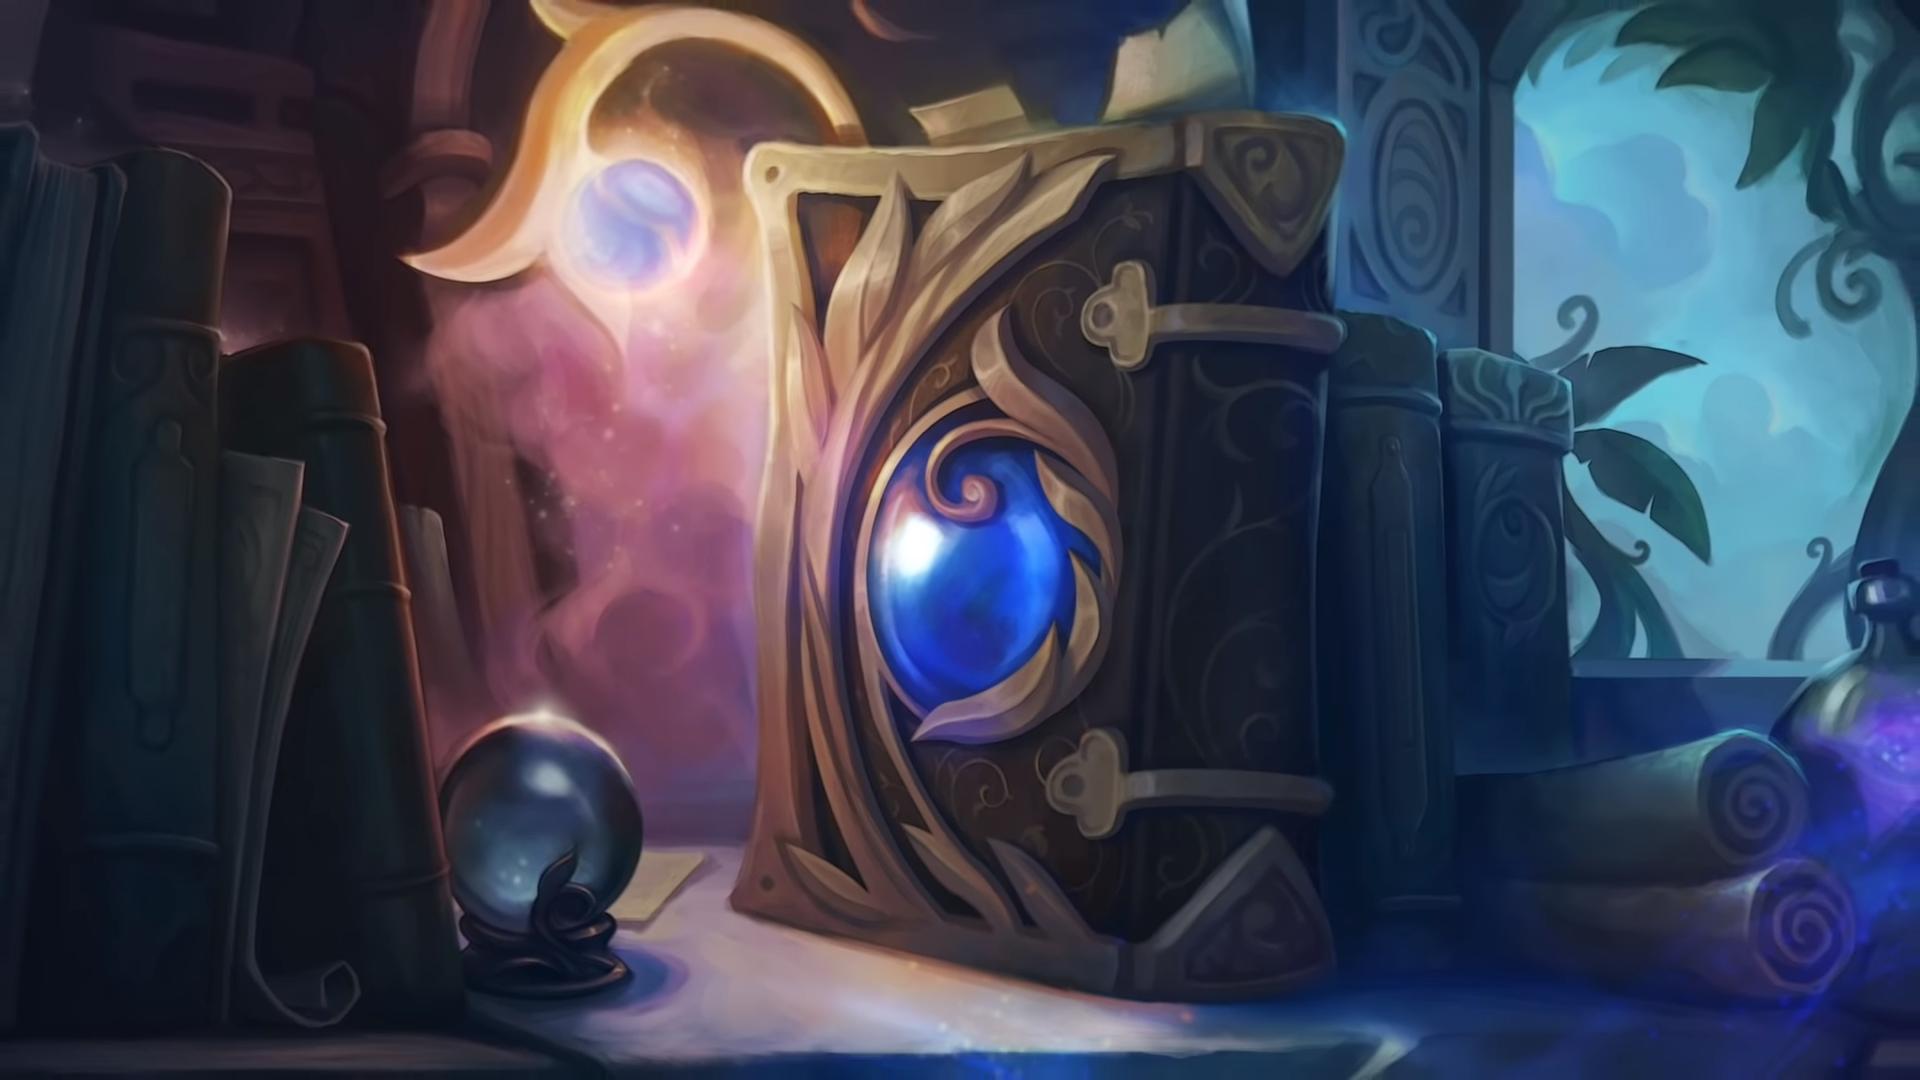 League's Season 9 teaser introduces a new mage support champion Dot Esports